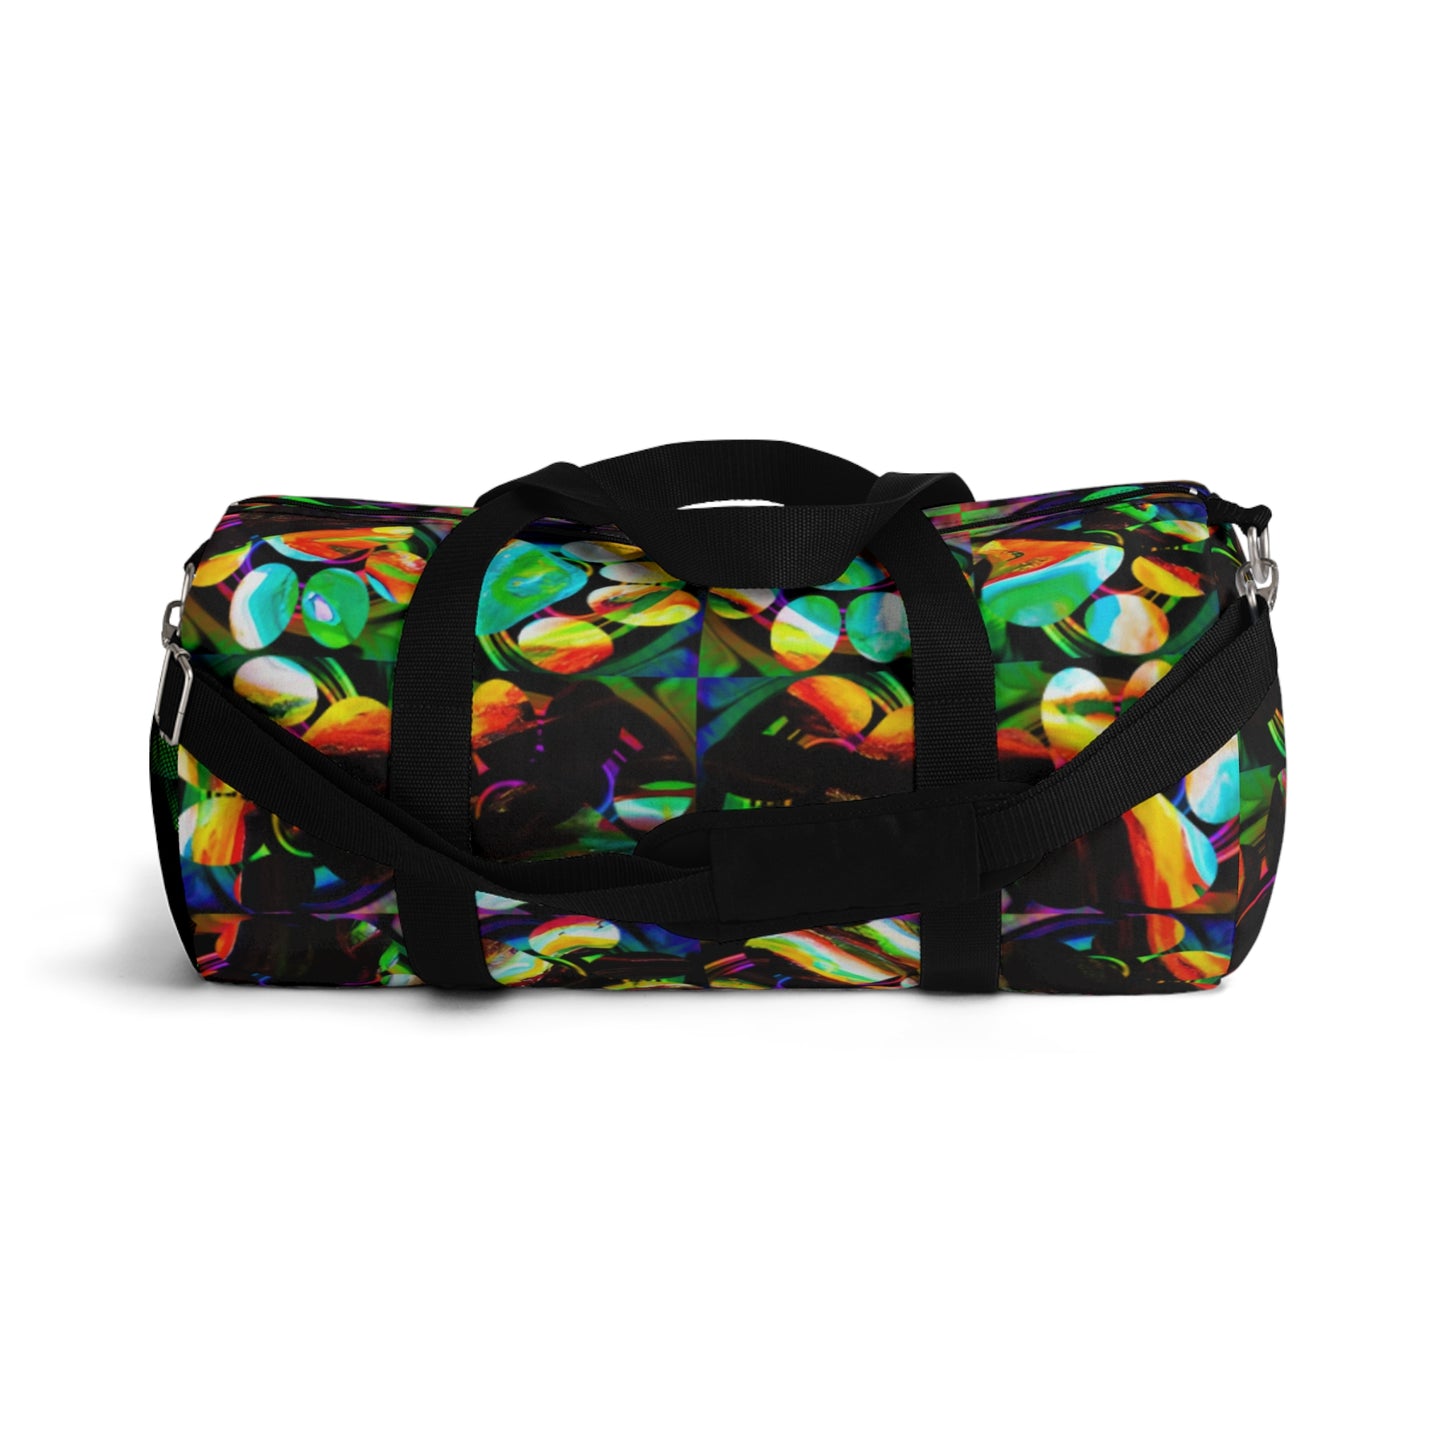 Flamme Couture - Paw Print - Duffel Bag